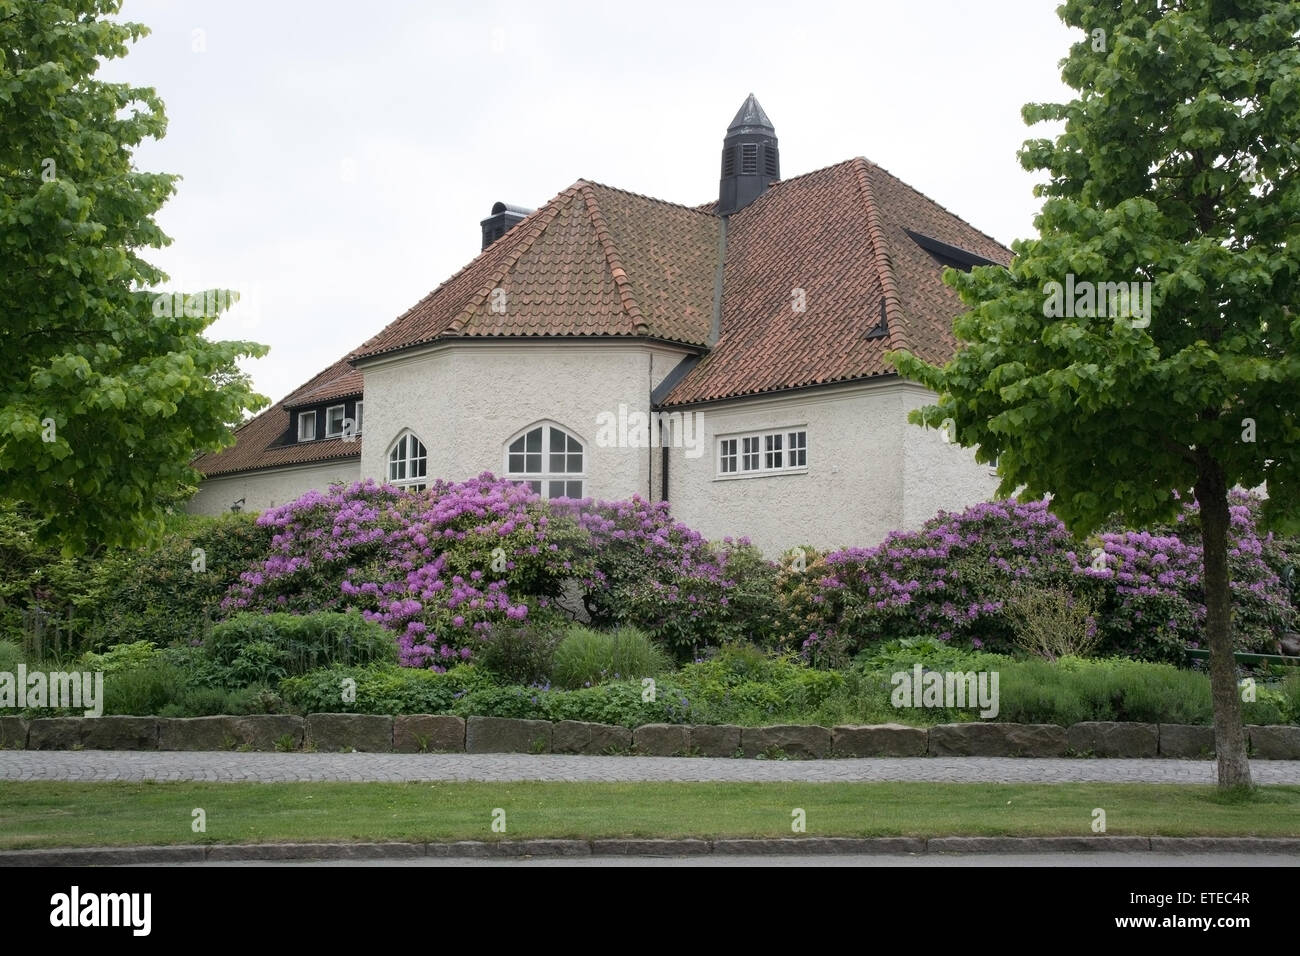 Old bathing house building in central town on June 6, 2015 in Falkenberg, Sweden. Stock Photo